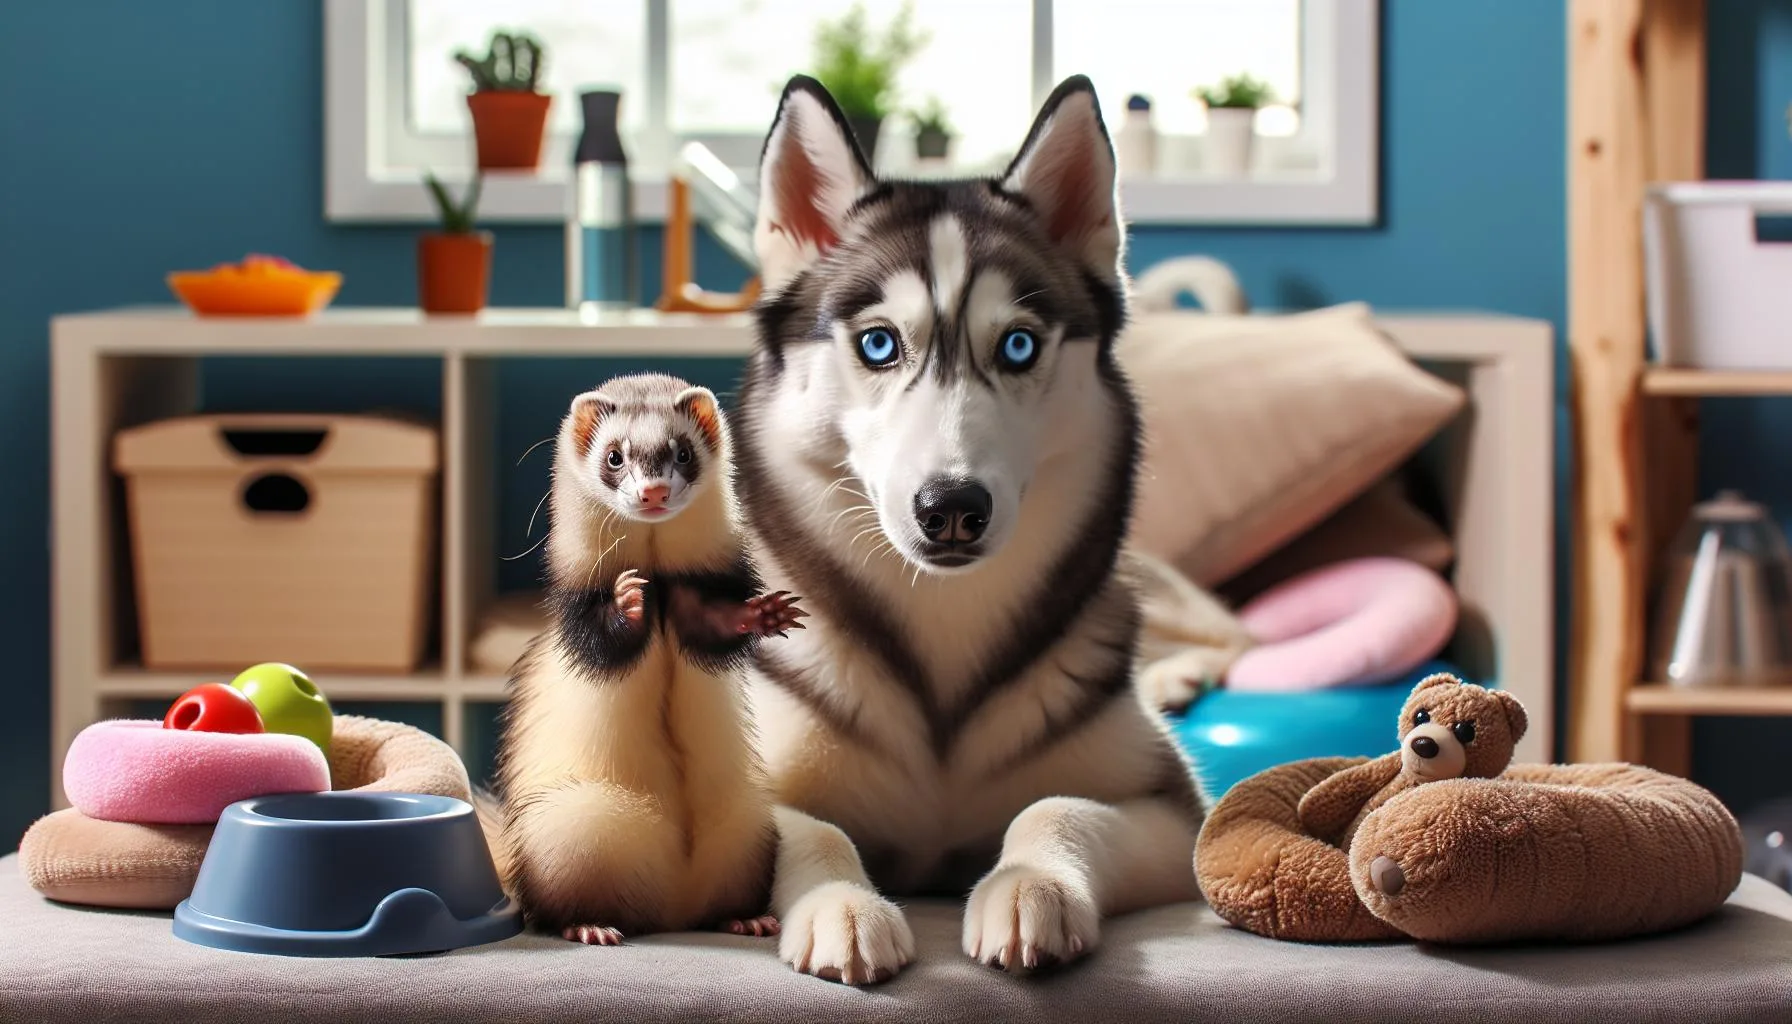 What Dogs Do Huskies Not Get Along With? Find Out Here!